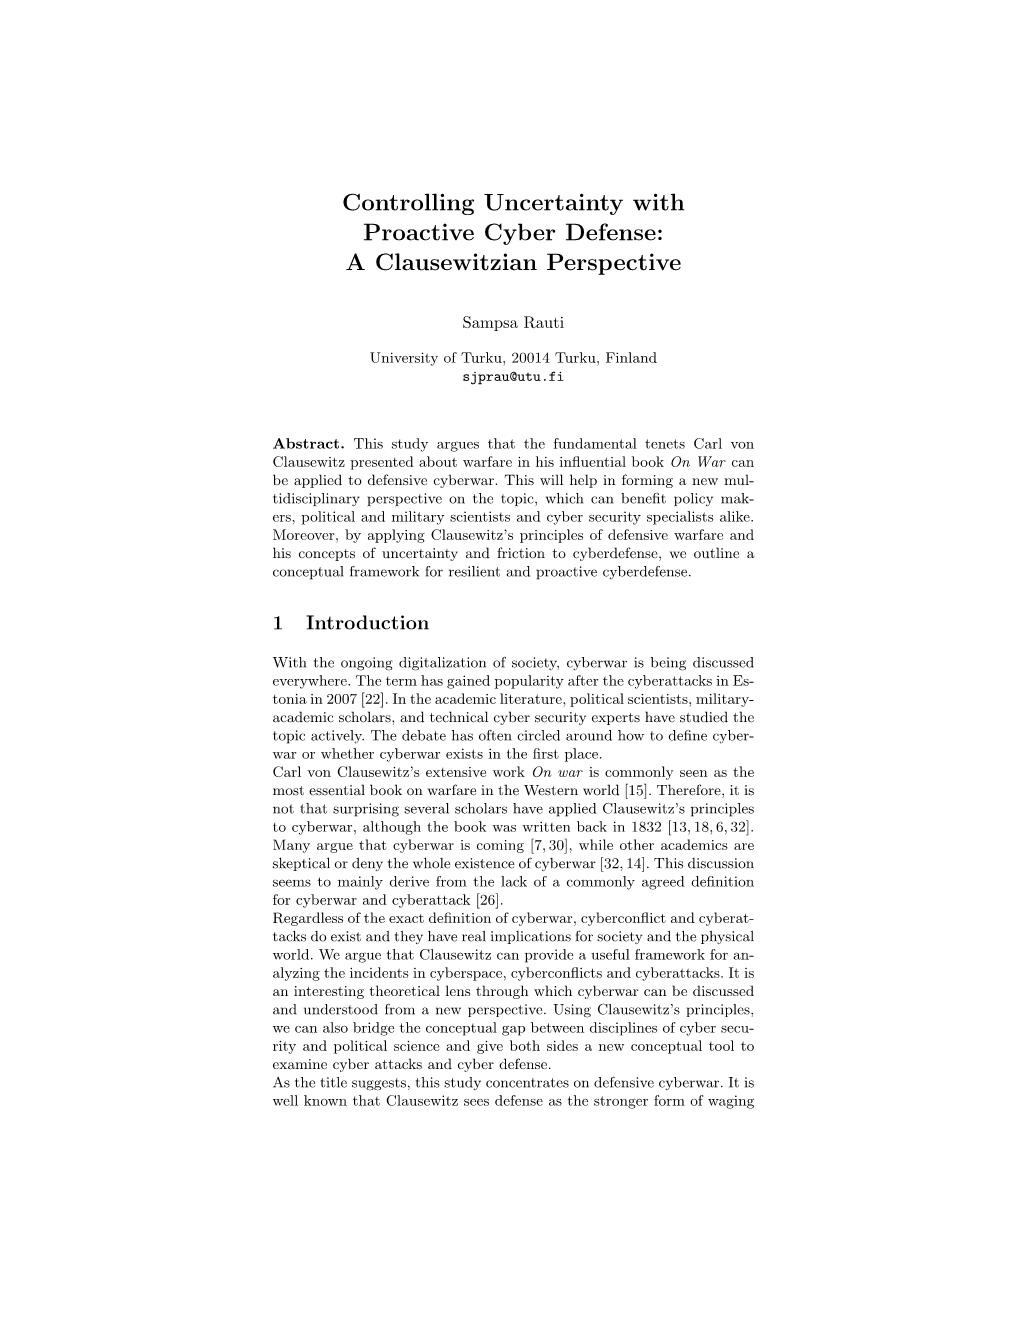 Controlling Uncertainty with Proactive Cyber Defense: a Clausewitzian Perspective